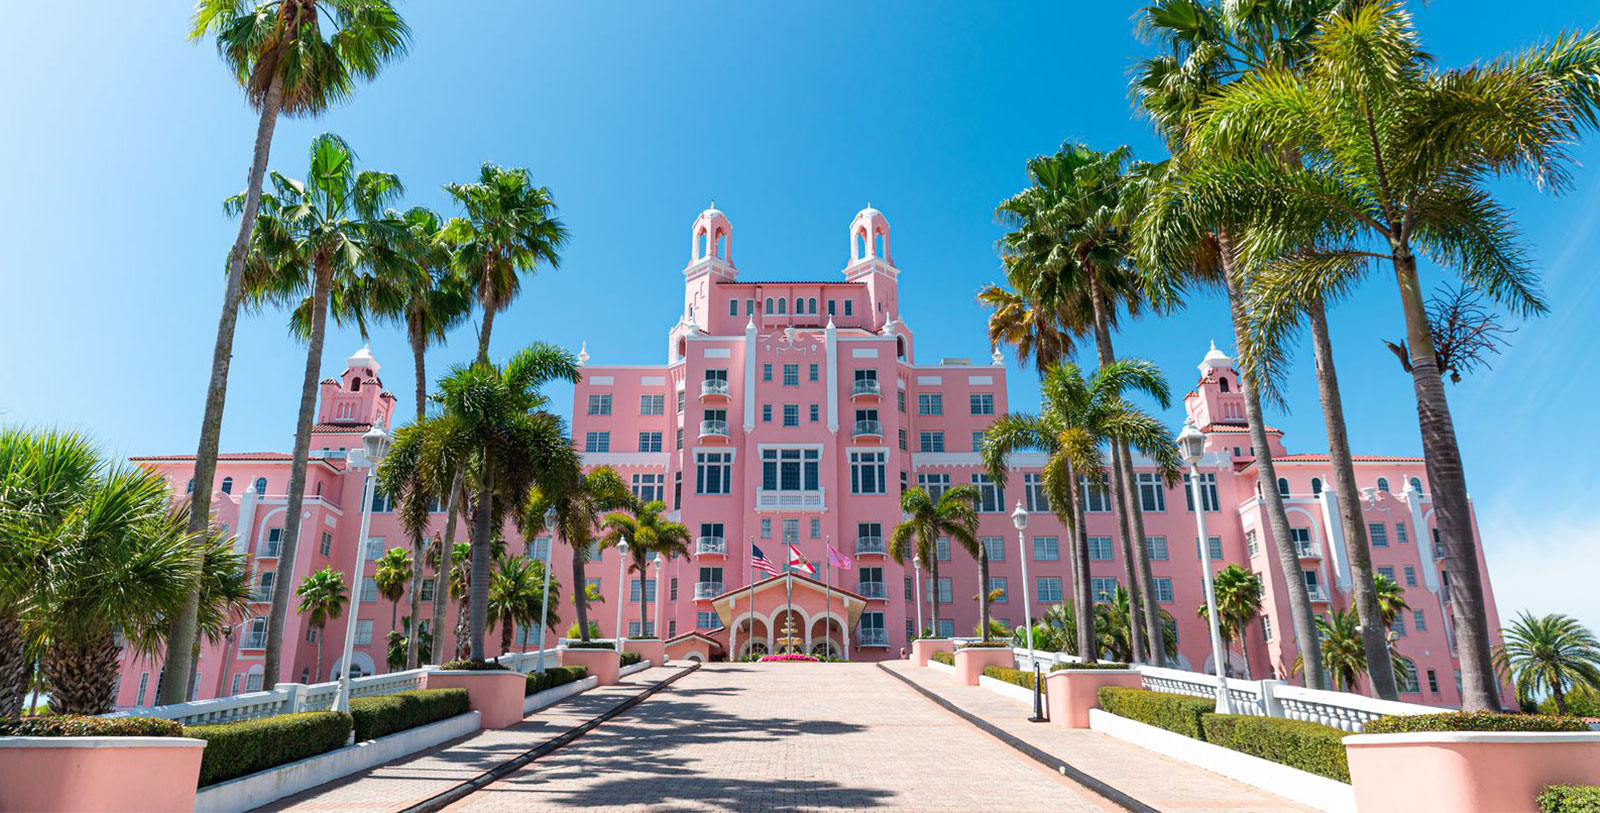 Image of Spa The Don CeSar, 1928, Member of Historic Hotels of America, in St. Petersburg, Florida, Explore